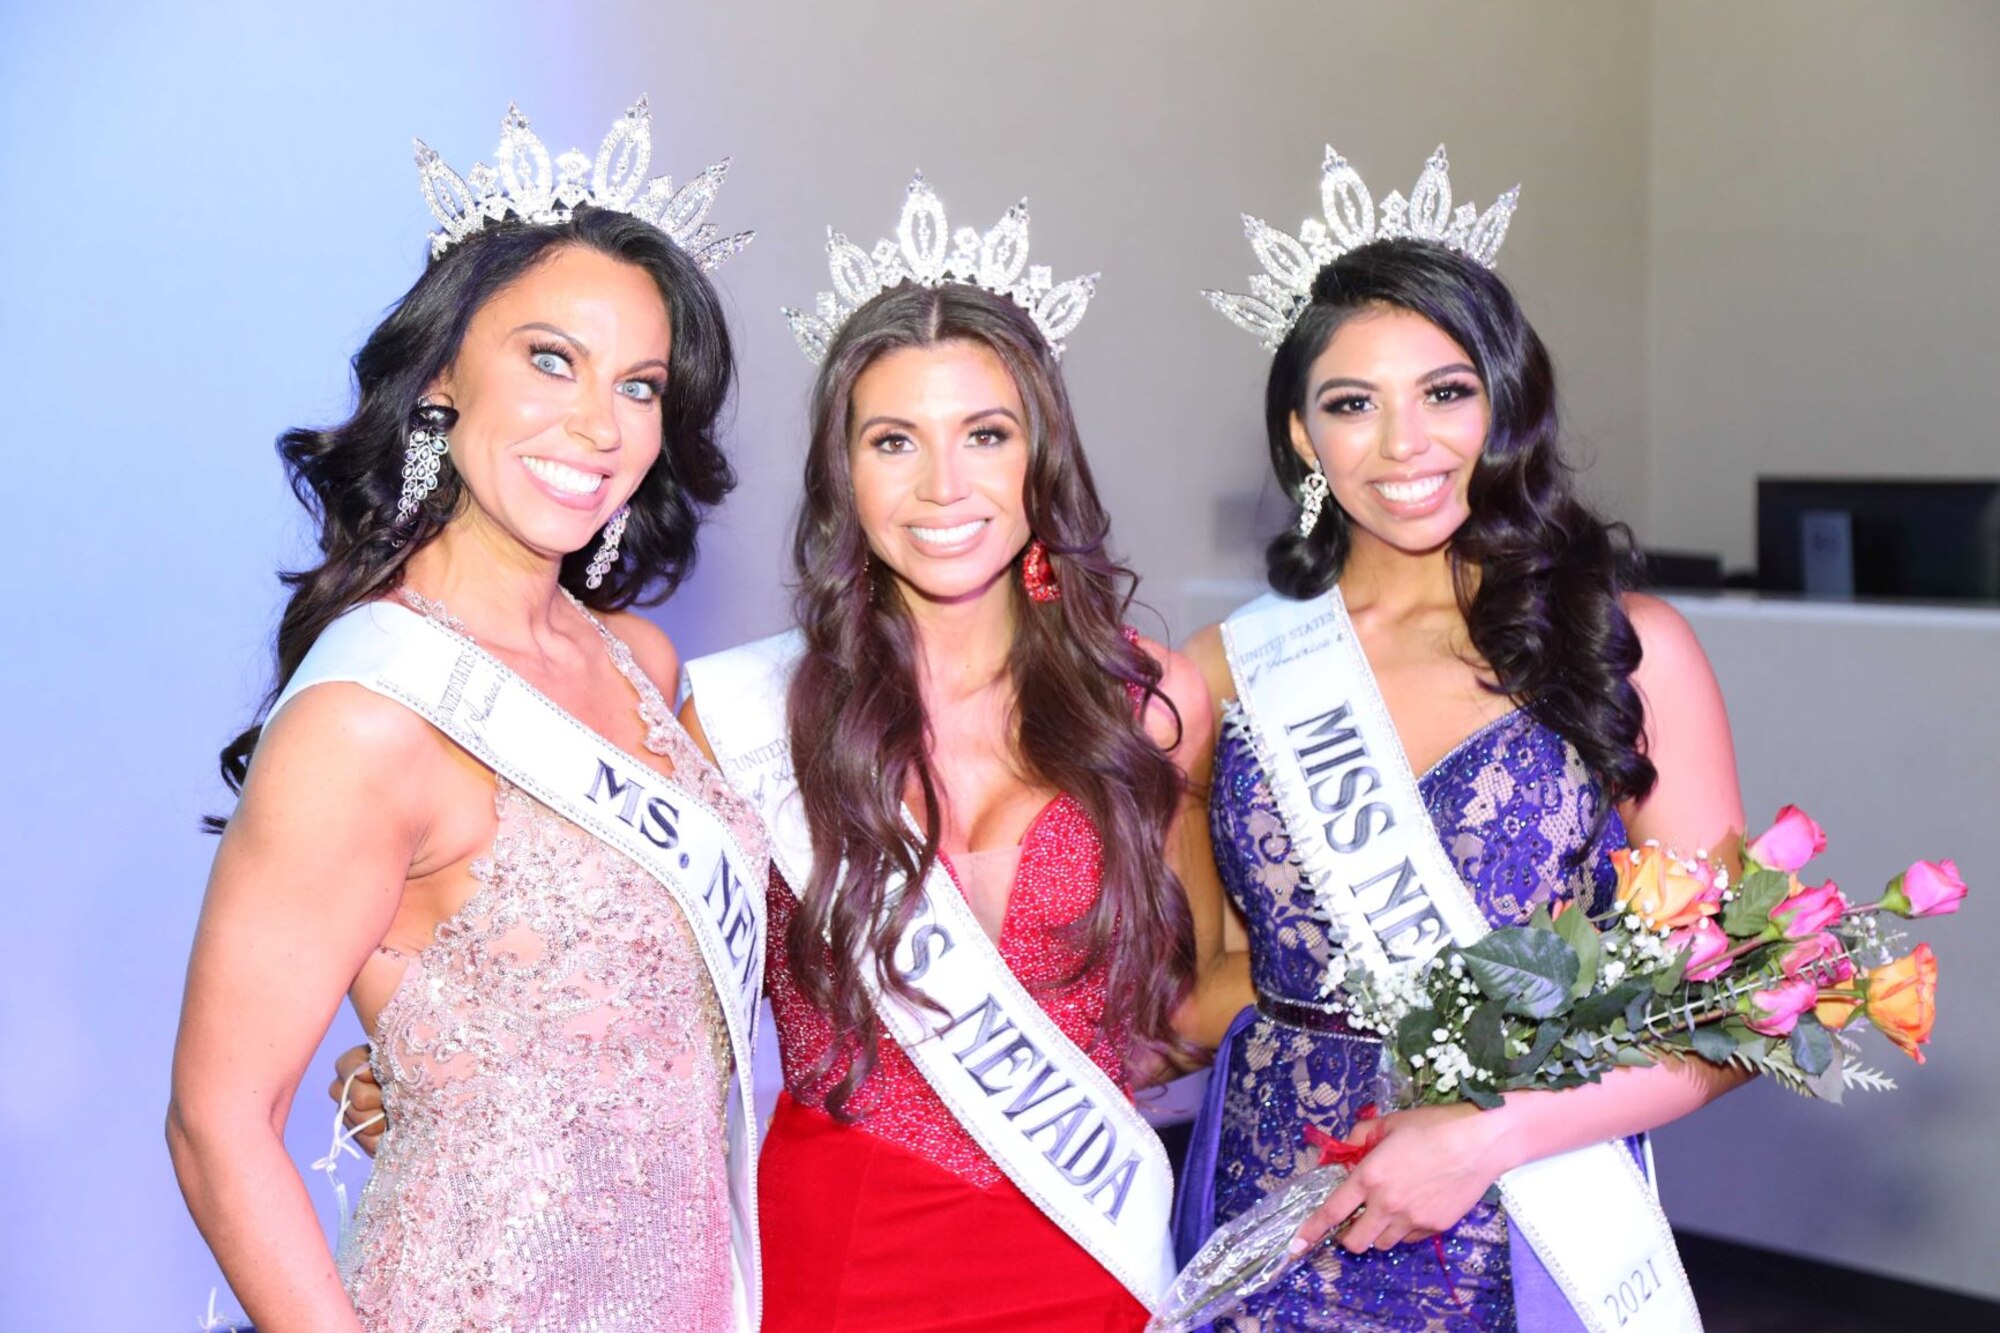 Maj. Jennifer stands with other participants in the United States of America's Mrs. Nevada pageant for a photo.